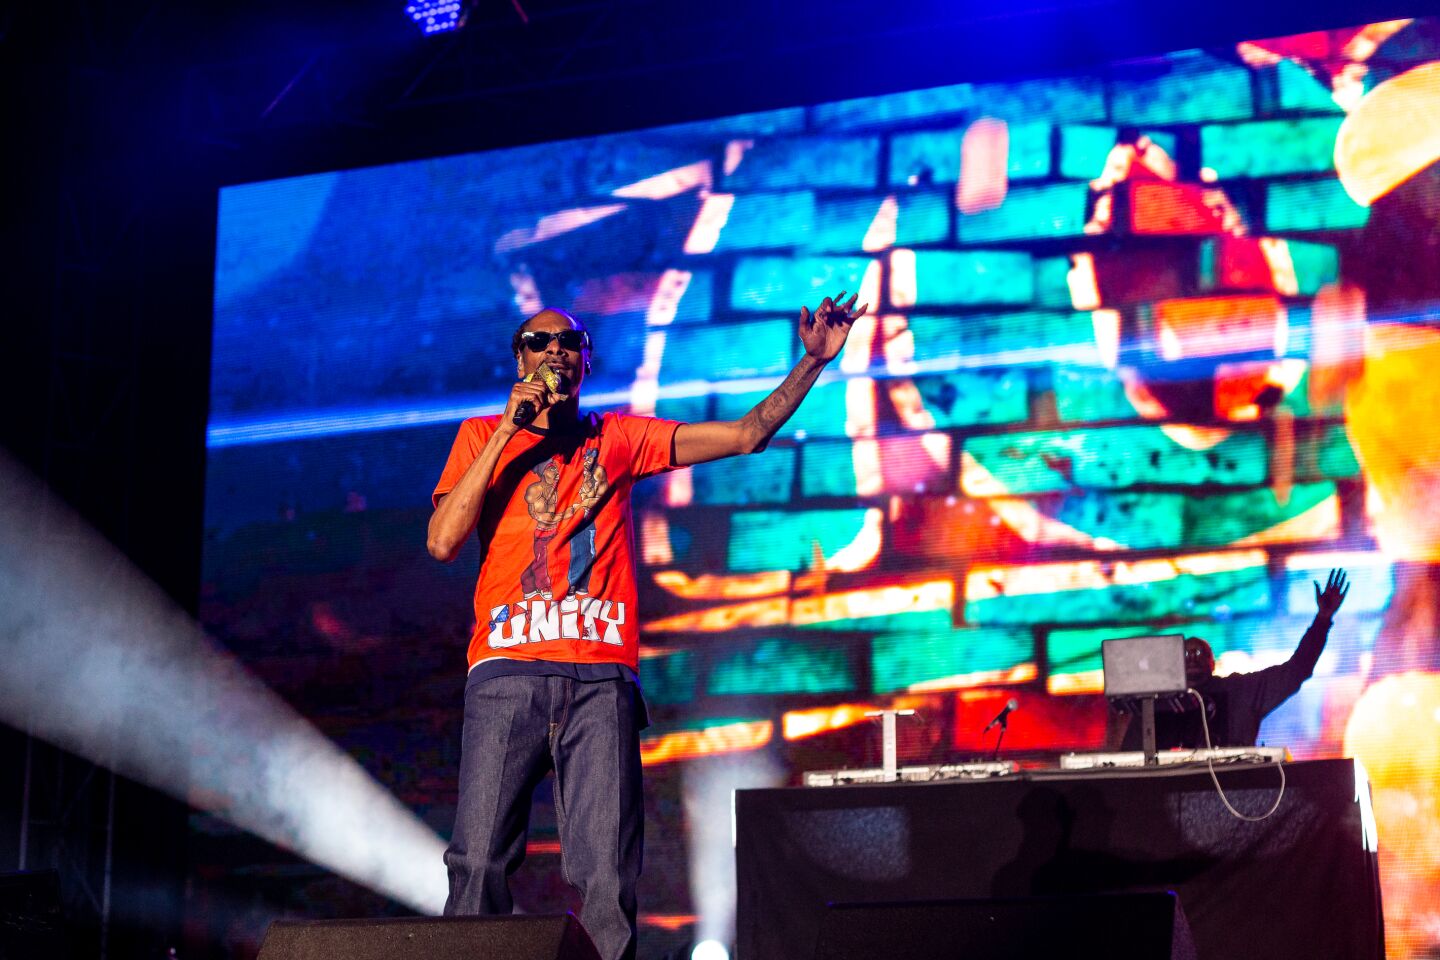 Day 1 of KAABOO Del Mar featured performances from Boyz II Men, Wu Tang Clan, Snoop Dogg and more.